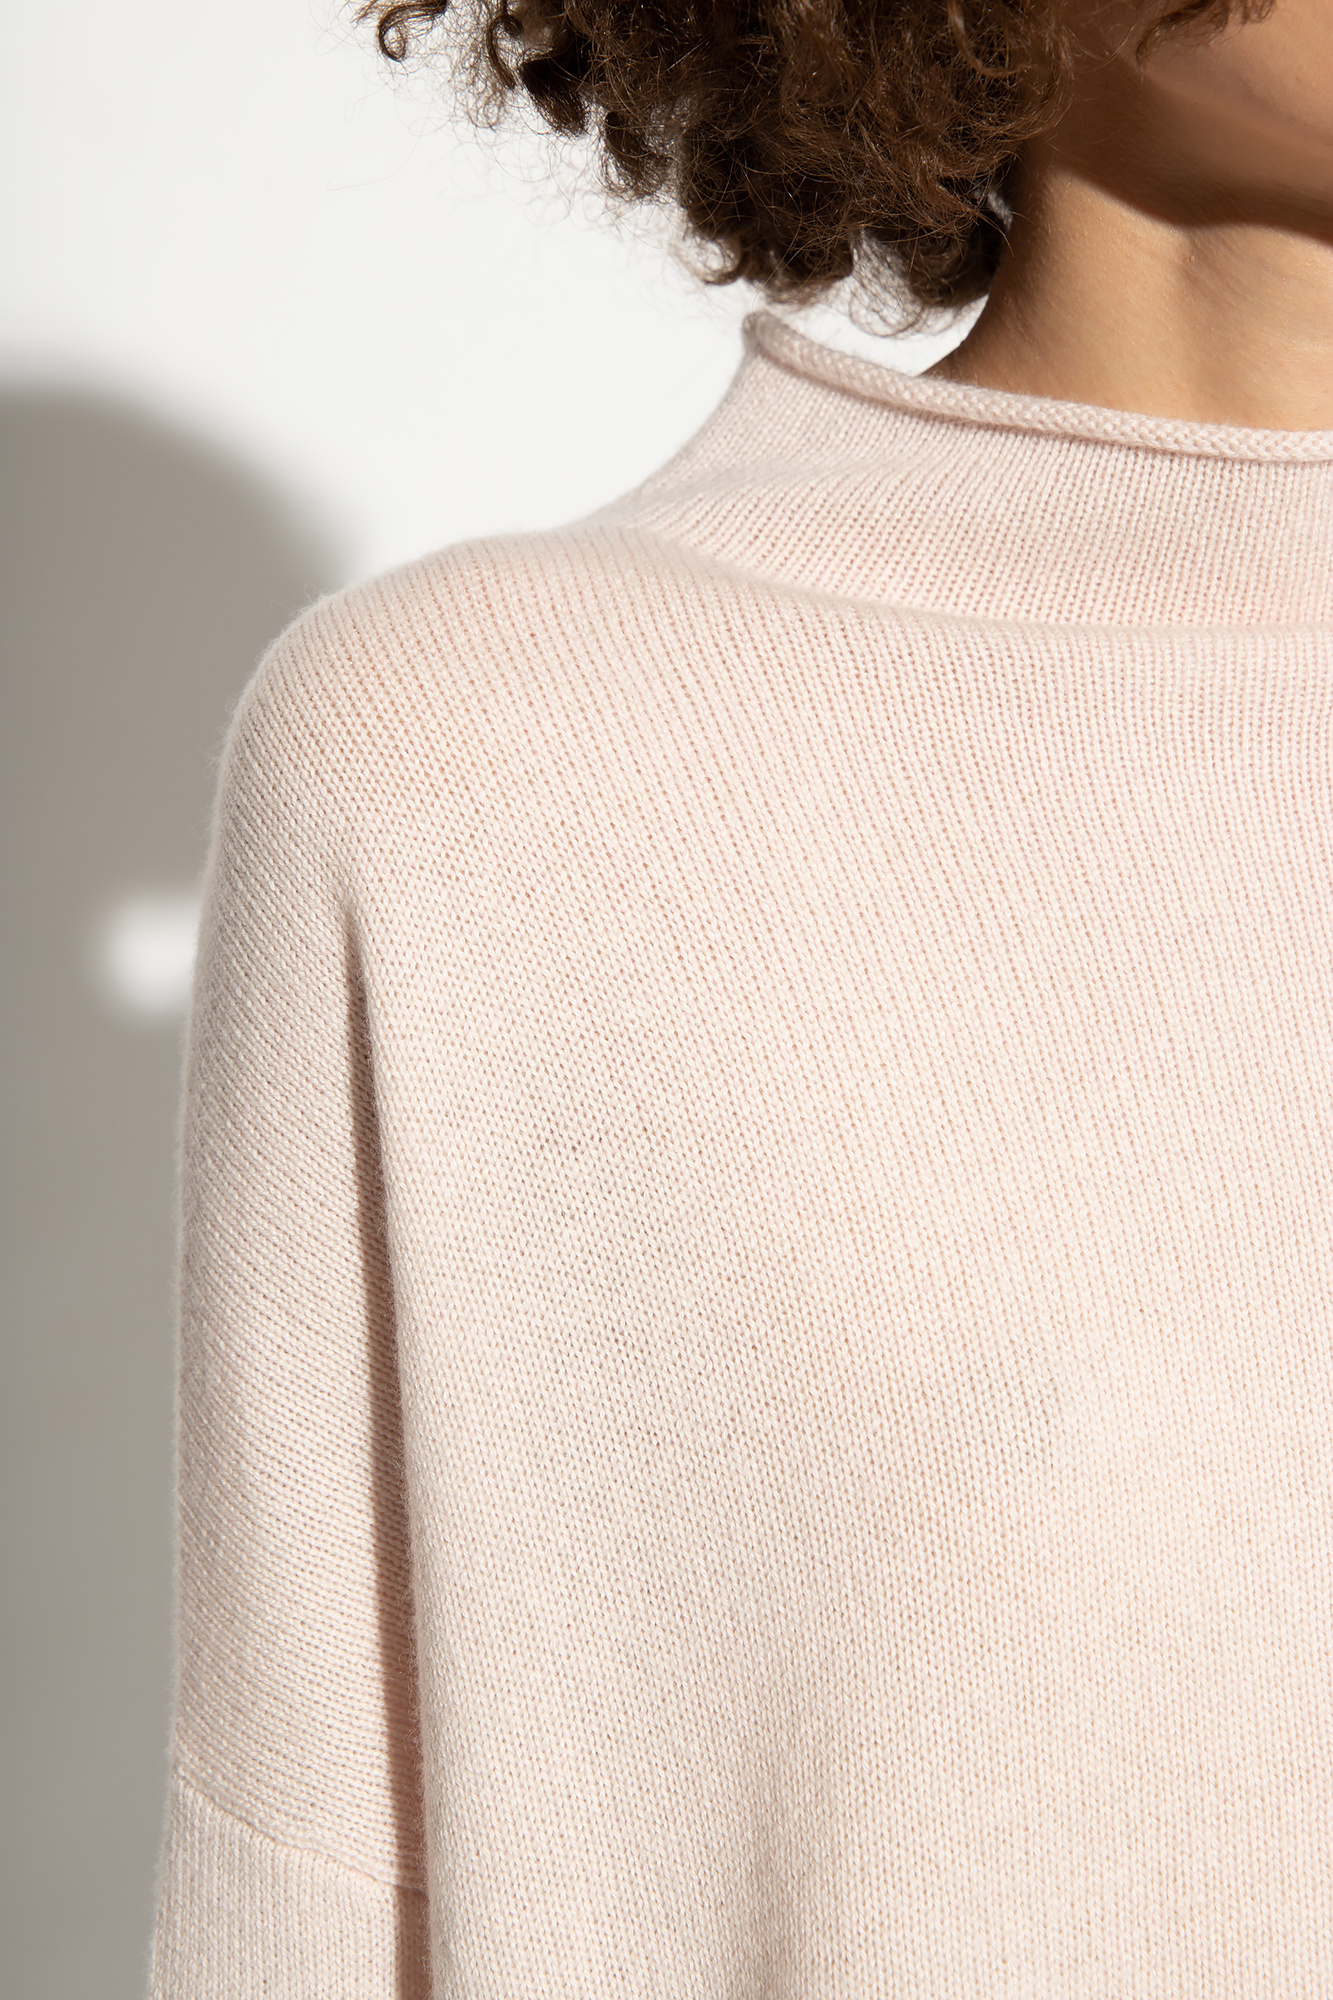 The Sandy Sweater | Mock neck cashmere sweater